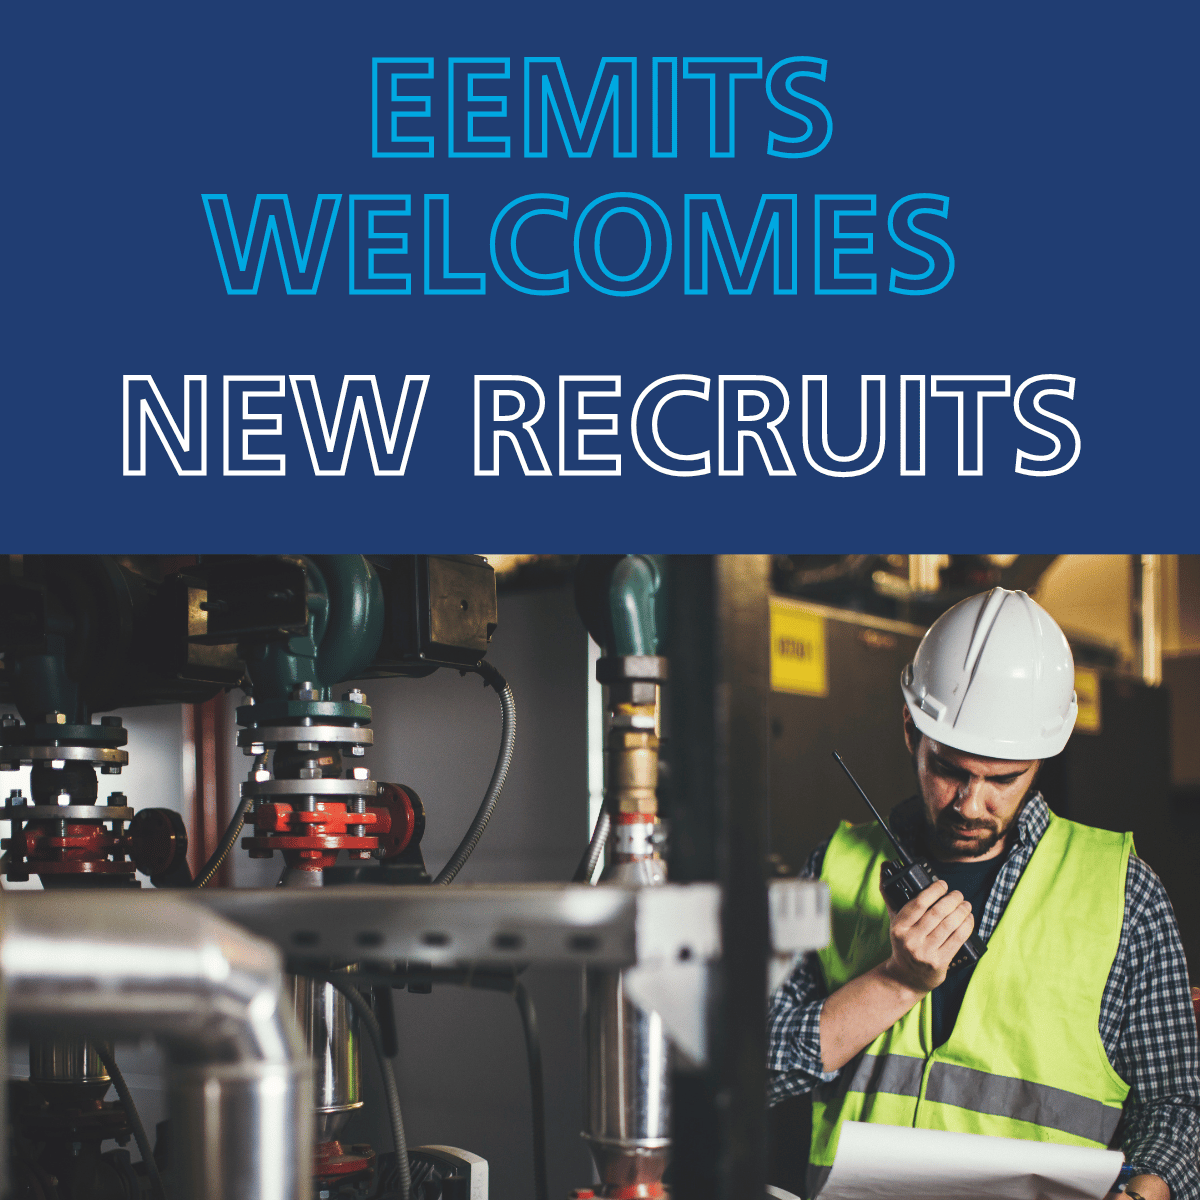 Eemits Welcomes New Recruits to Business